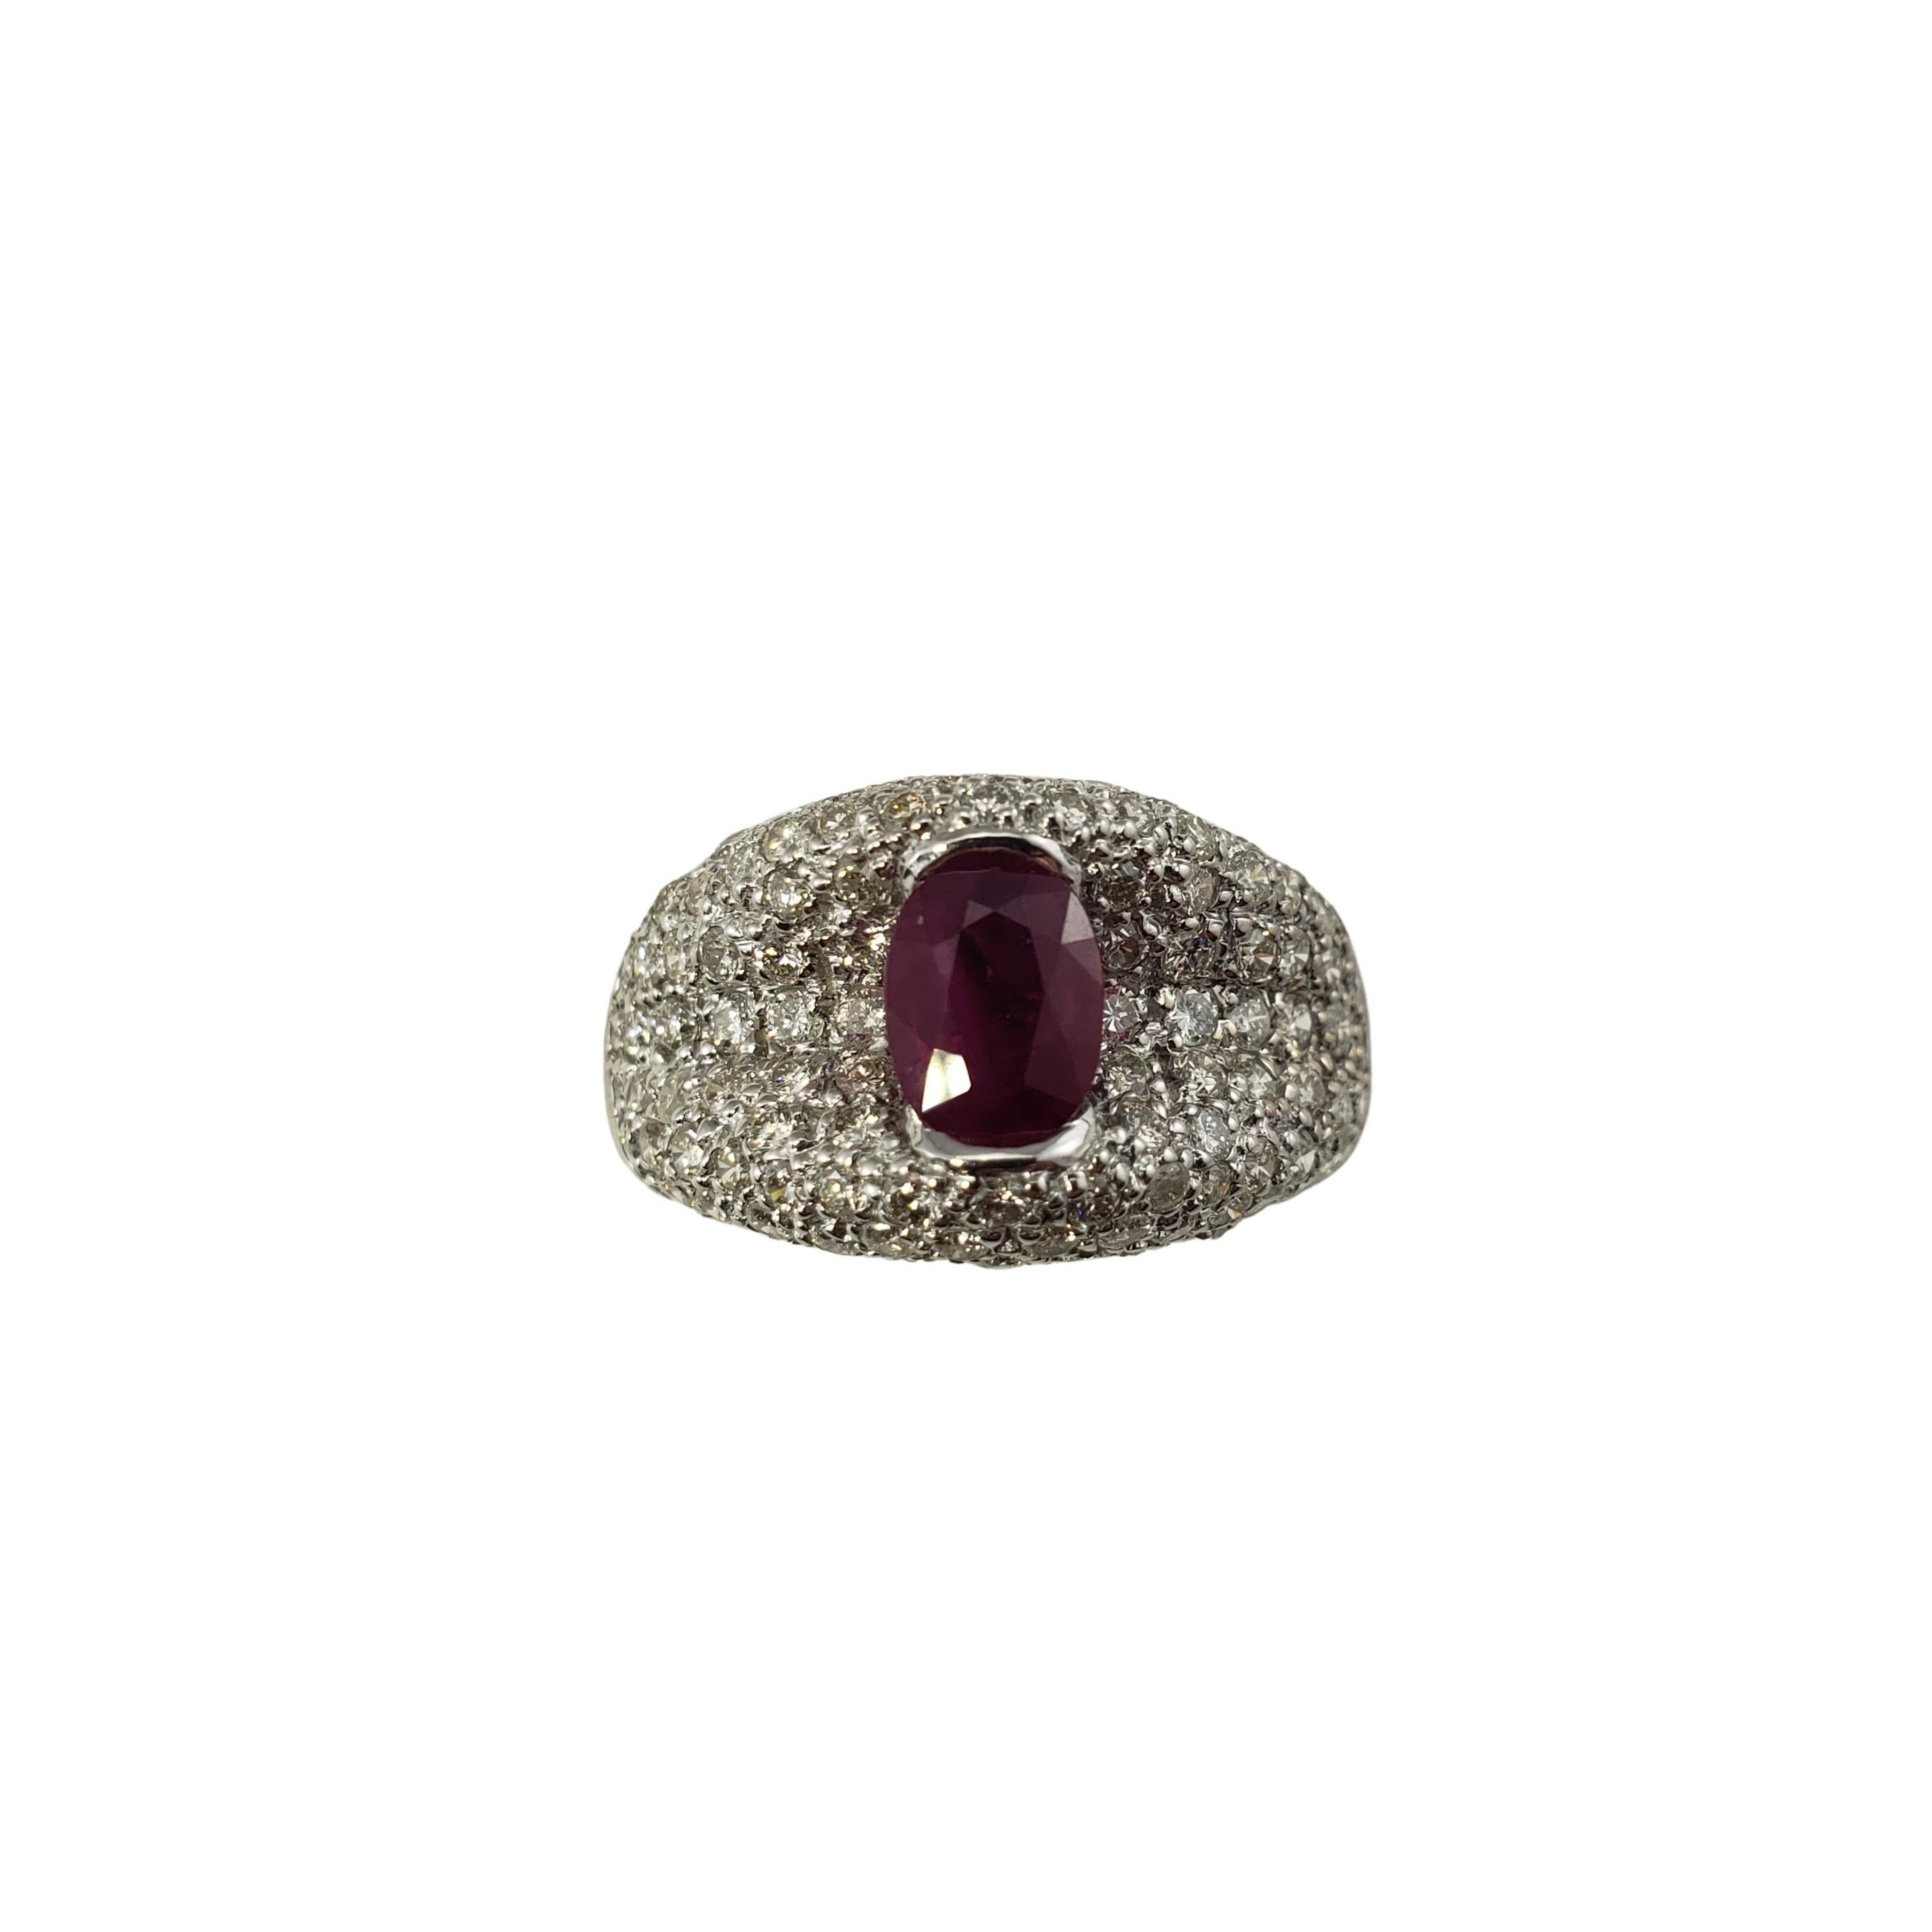 18 Karat White Gold Ruby and Diamond Ring Size 6.75 GAI Certified-

This stunning ring features one oval ruby (7 mm x 5 mm) and 106 round brilliant cut diamonds set in beautifully detailed 18K white gold.  Width: 12 mm.  Shank:  4 mm.  Height: 8